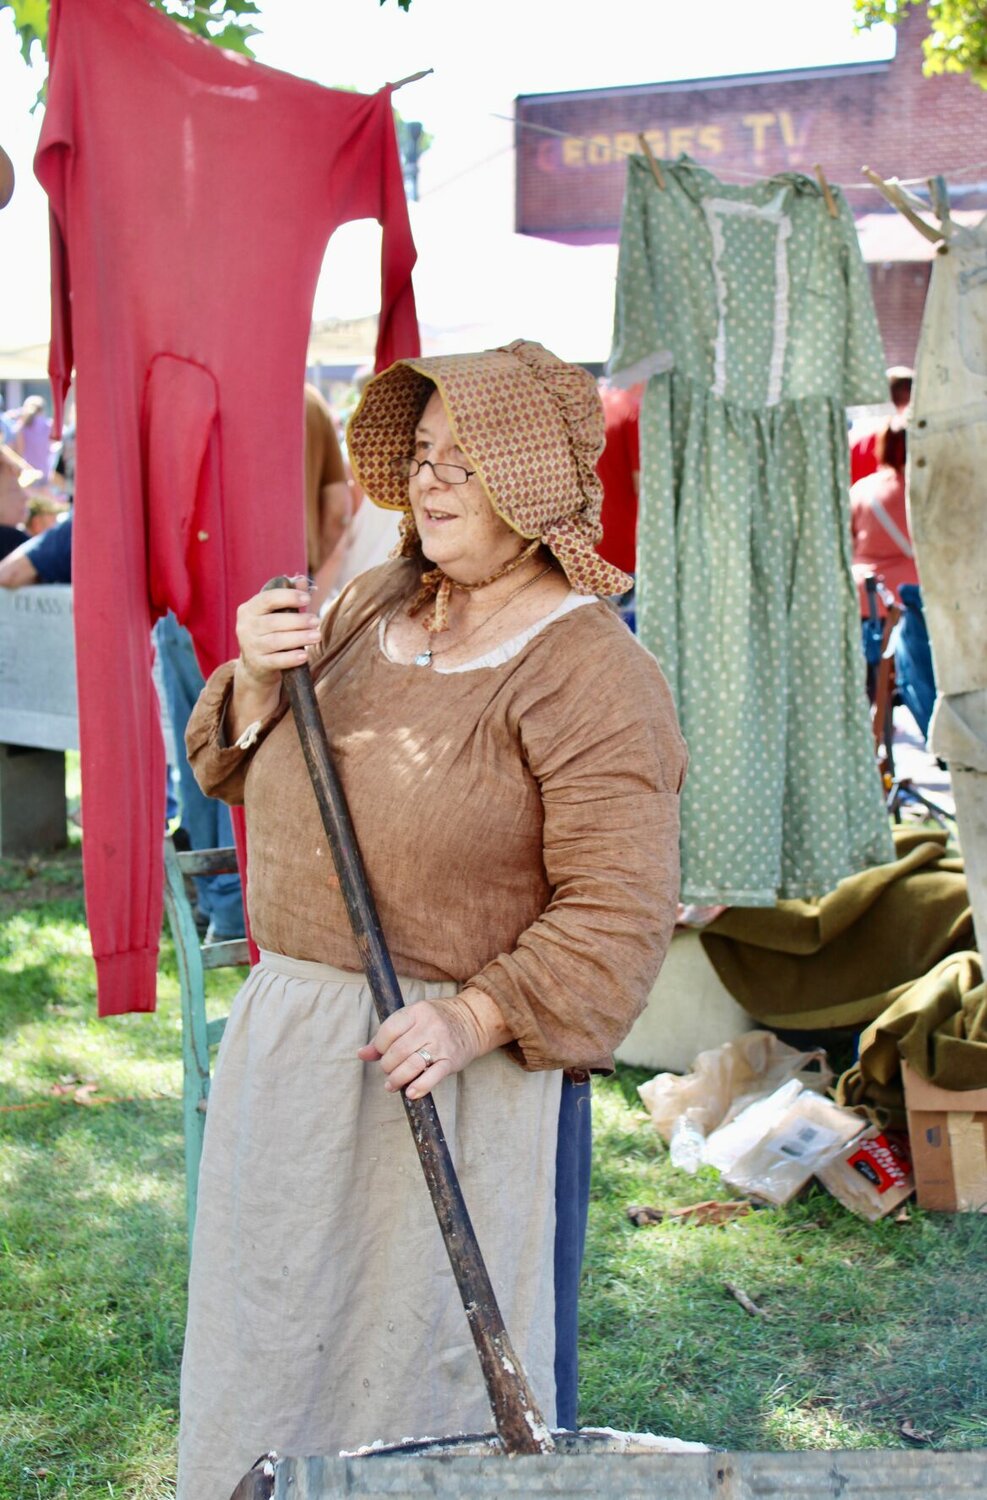 One of the demonstrators at the festival, showing how old fashioned lye soap is traditionally made, was Cathy Wyatt of Eminence.